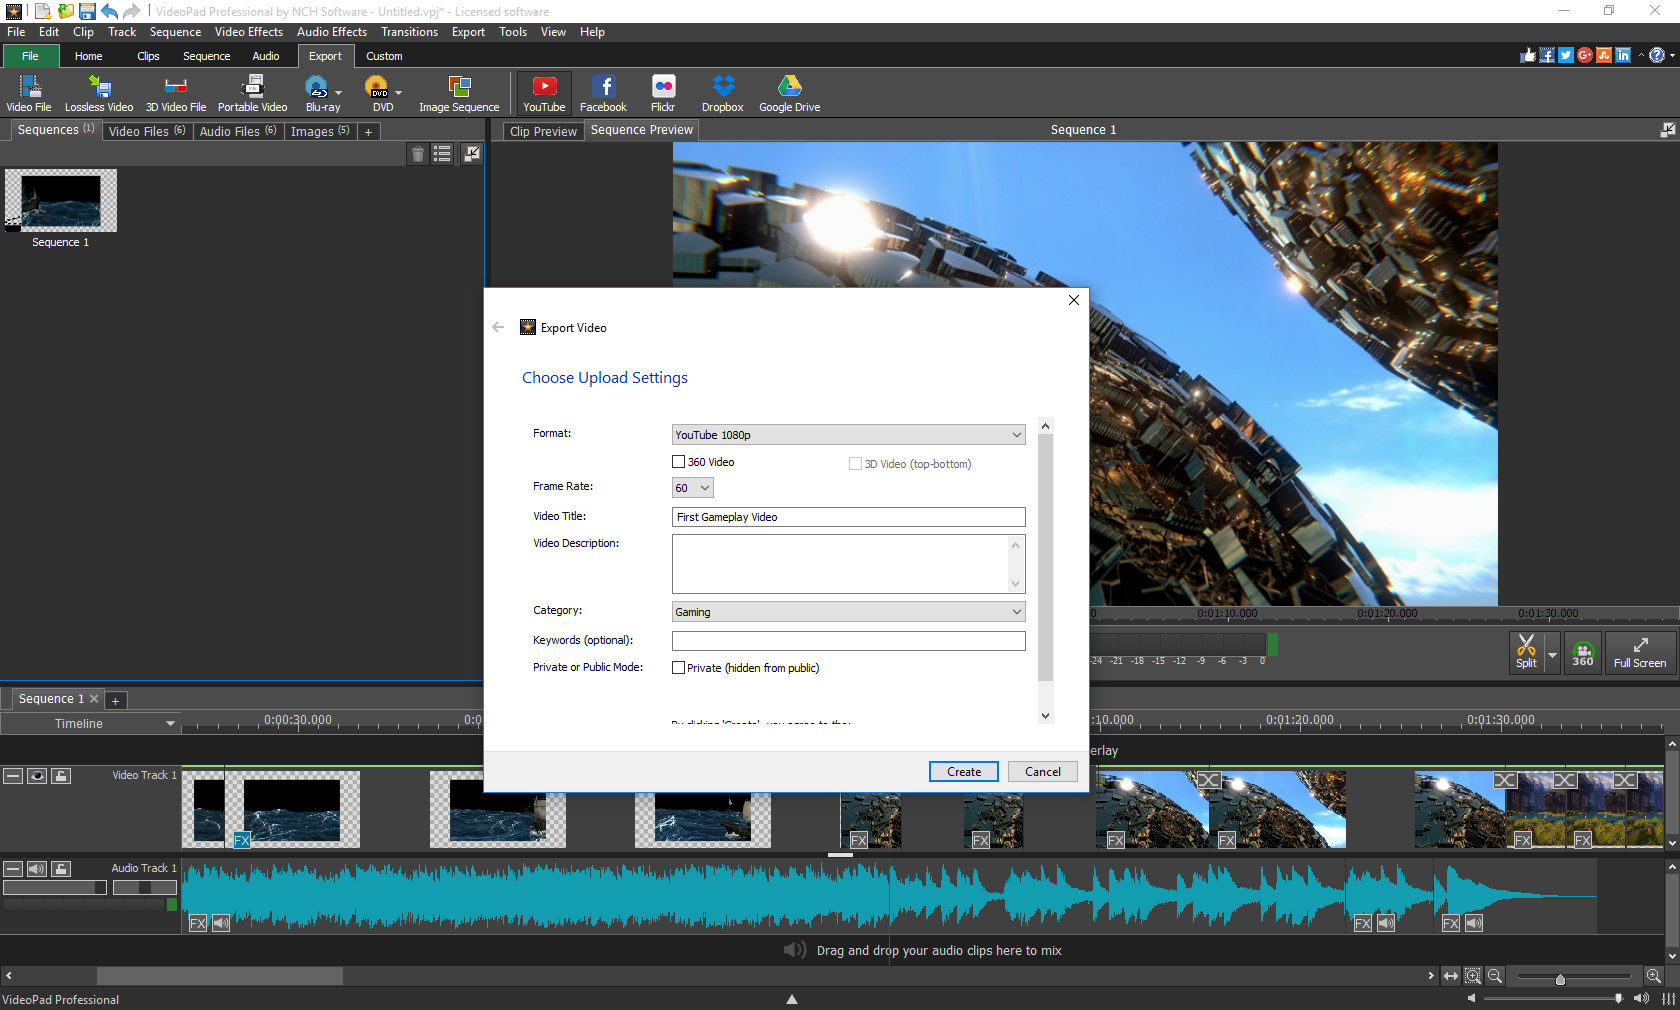 nch videopad video editor compatible files for editing